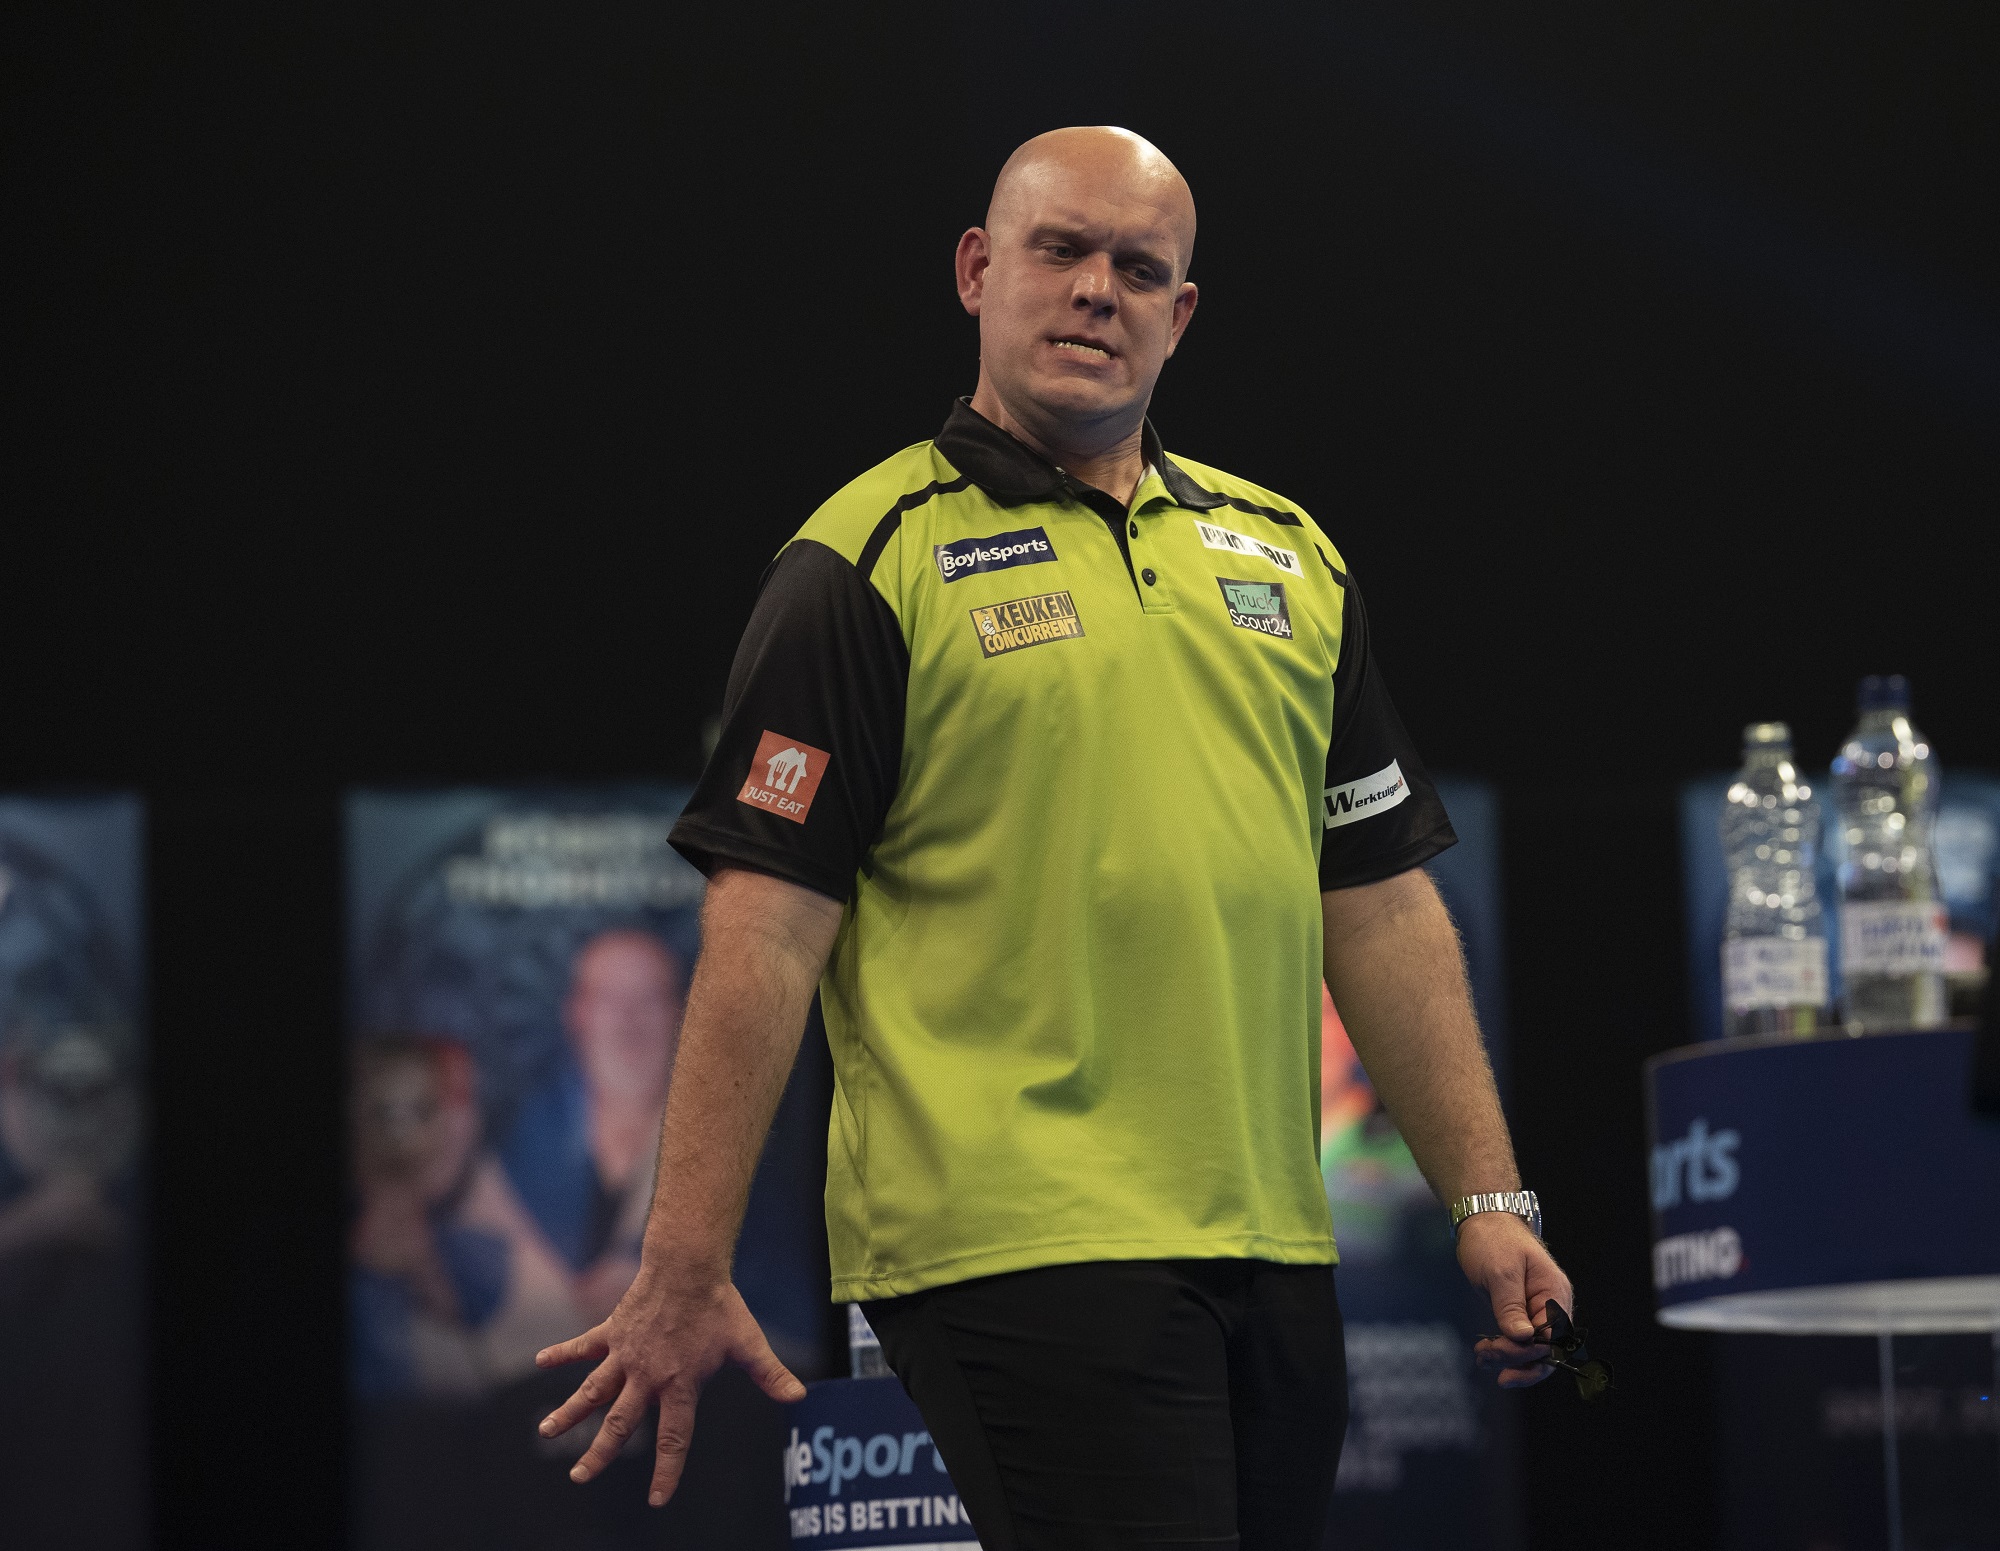 MvG and Anderson out on night five of World Grand Prix